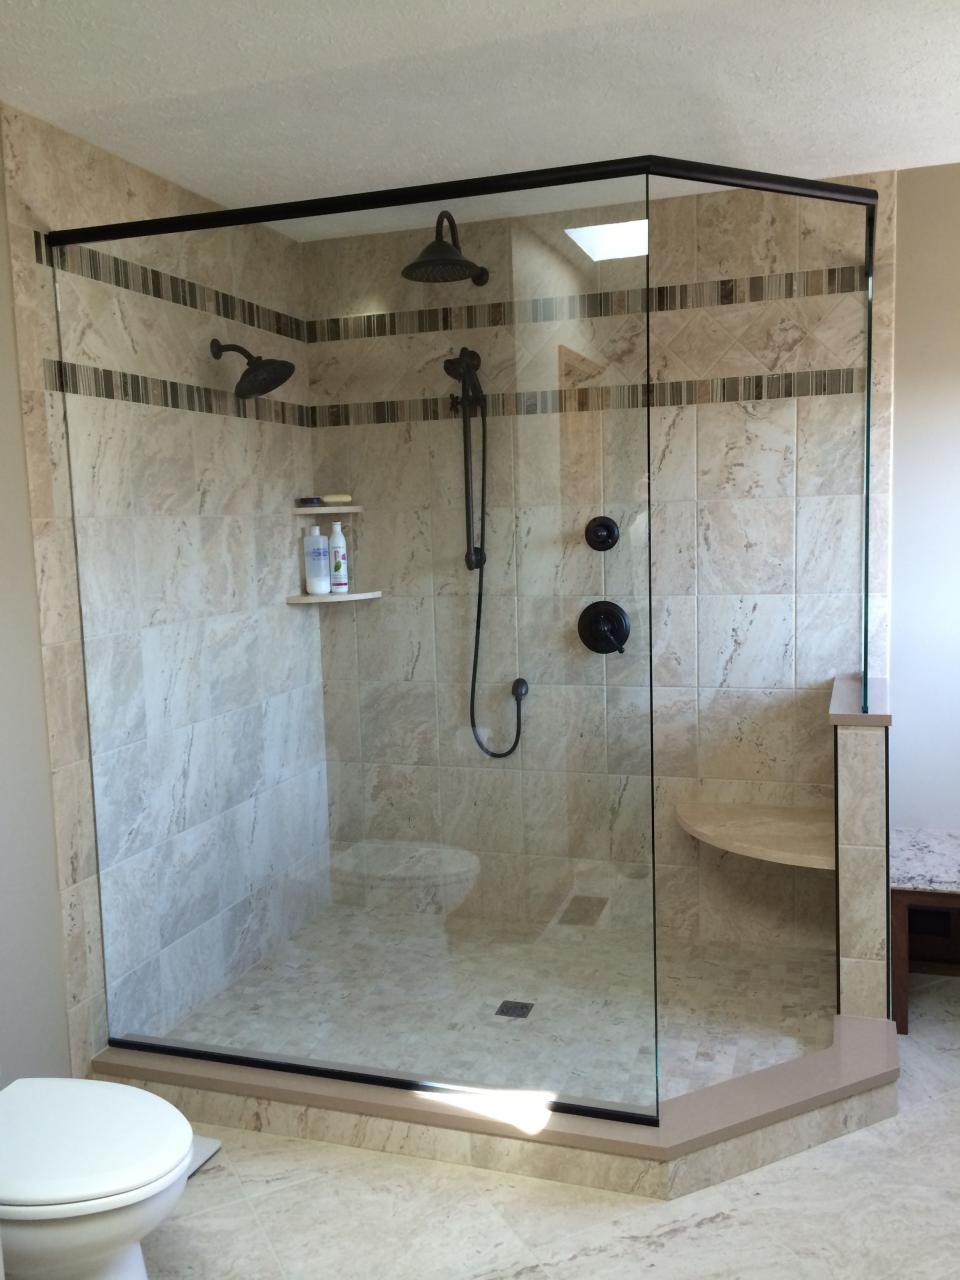 I love my walkin shower! We removed a big garden tub from corner of